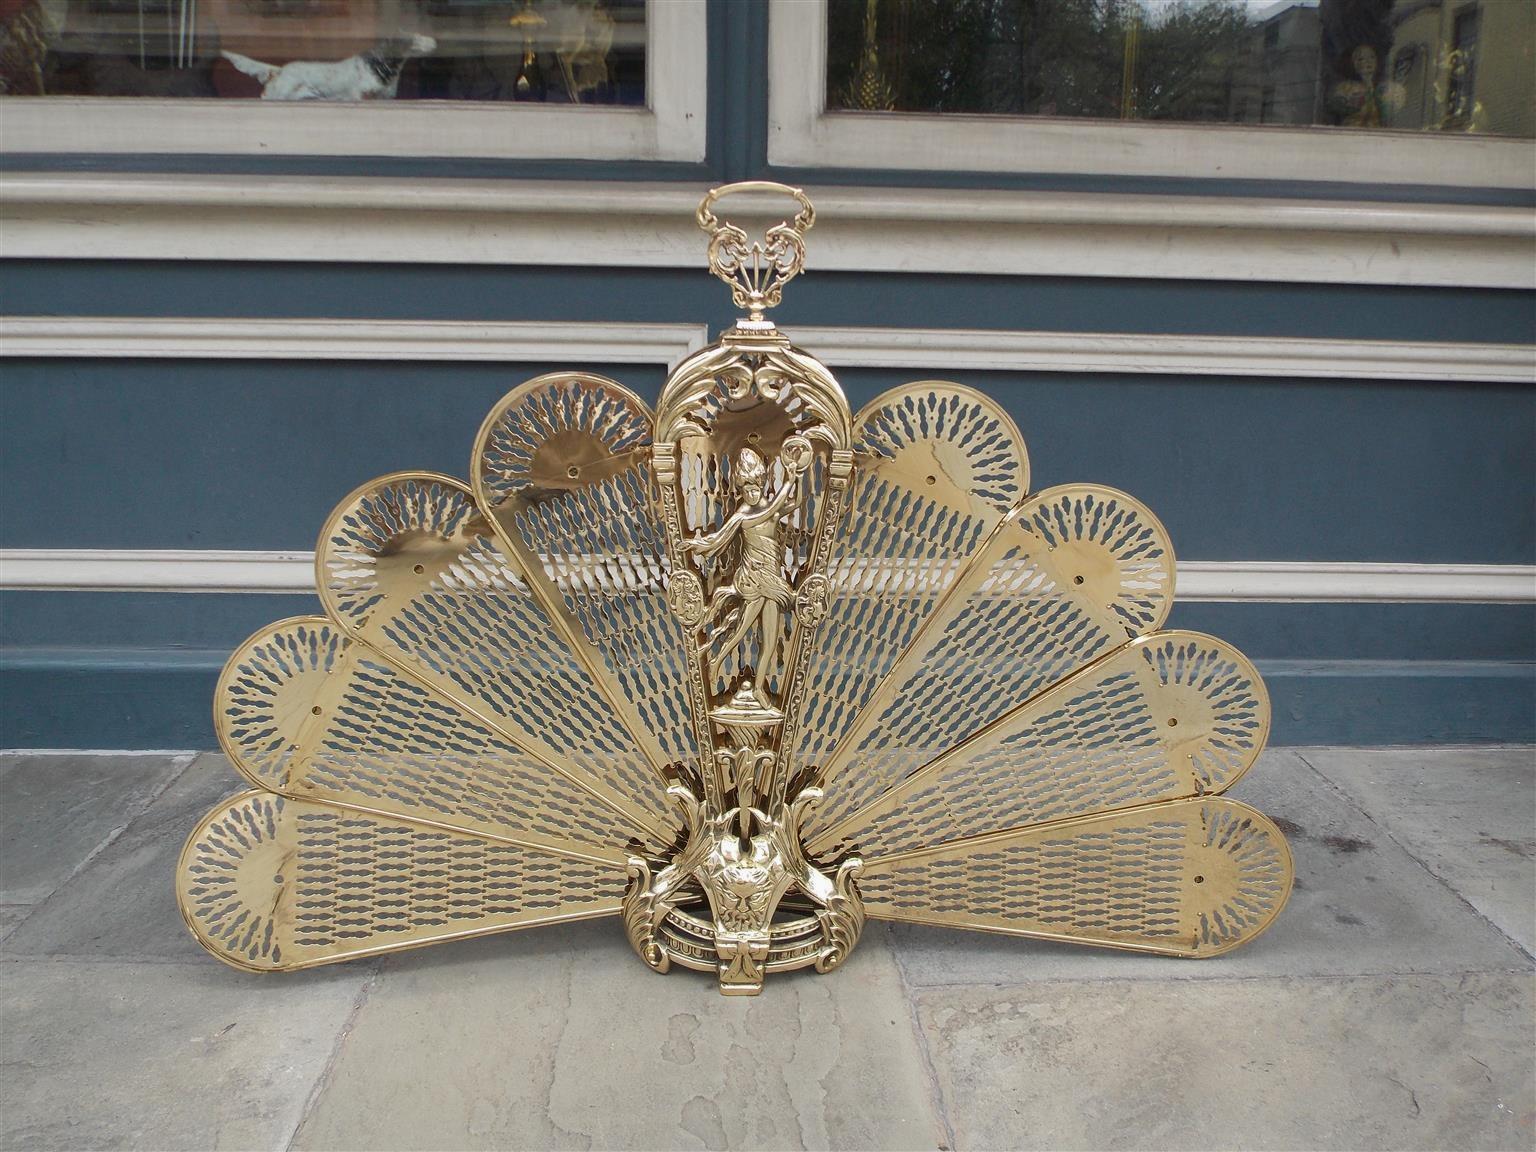 French brass figural fire screen with dancing woman playing tambourine, centered foliage handle, decorative pierced chased folding fans, acanthus motif, and terminating on a scrolled floral beaded swag base with mythological figural medallion, Early